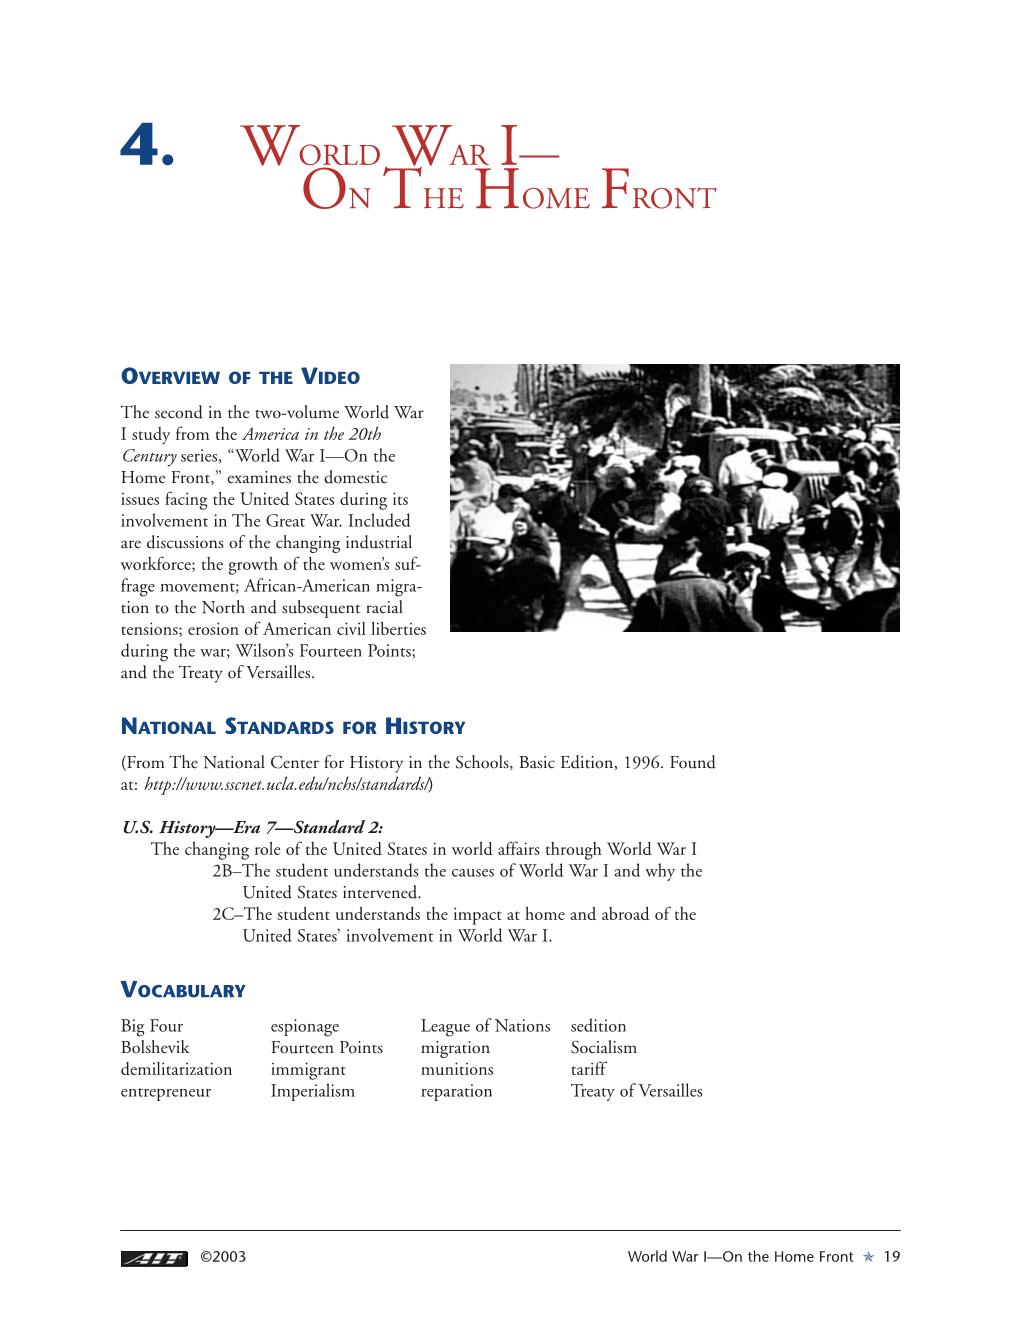 4. World War I— on the Home Front